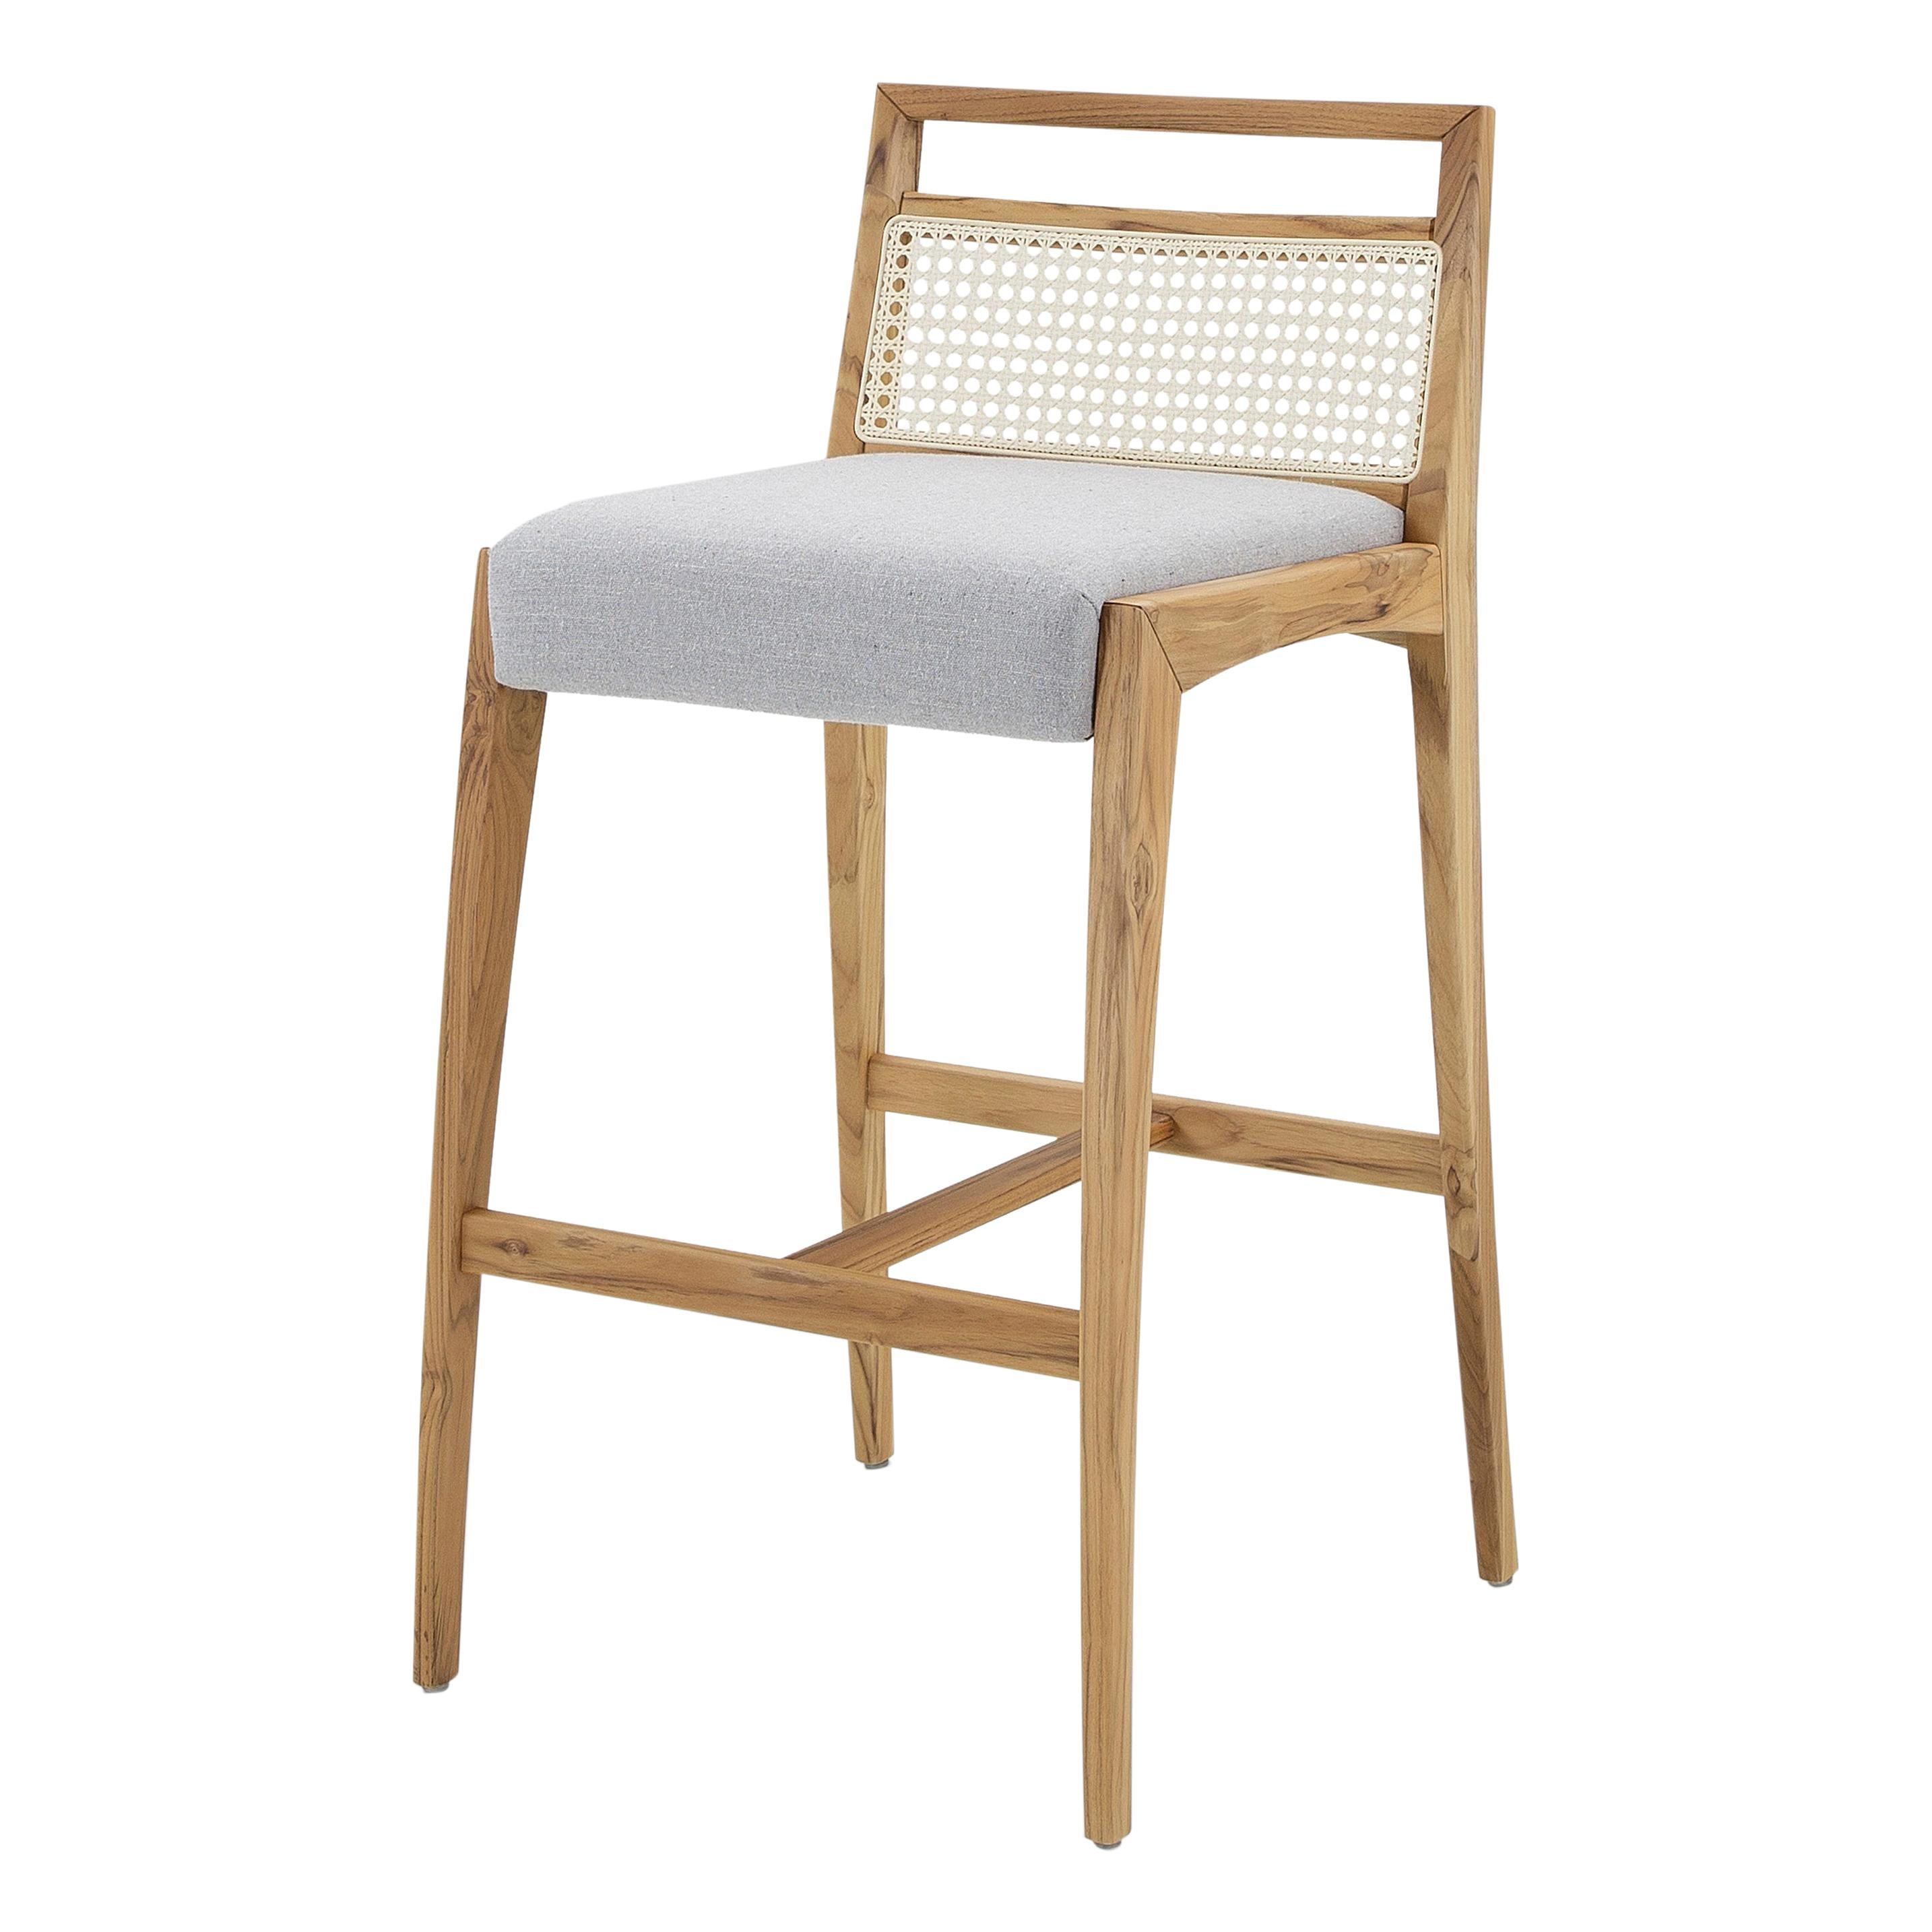 The Sotto counter stool is a piece that is designed with a taller high to use at a countertop or a high table. This chair has striking features, where resistance and delicacy meet. Designed with a teak finish wood legs and frame, a gray fabric